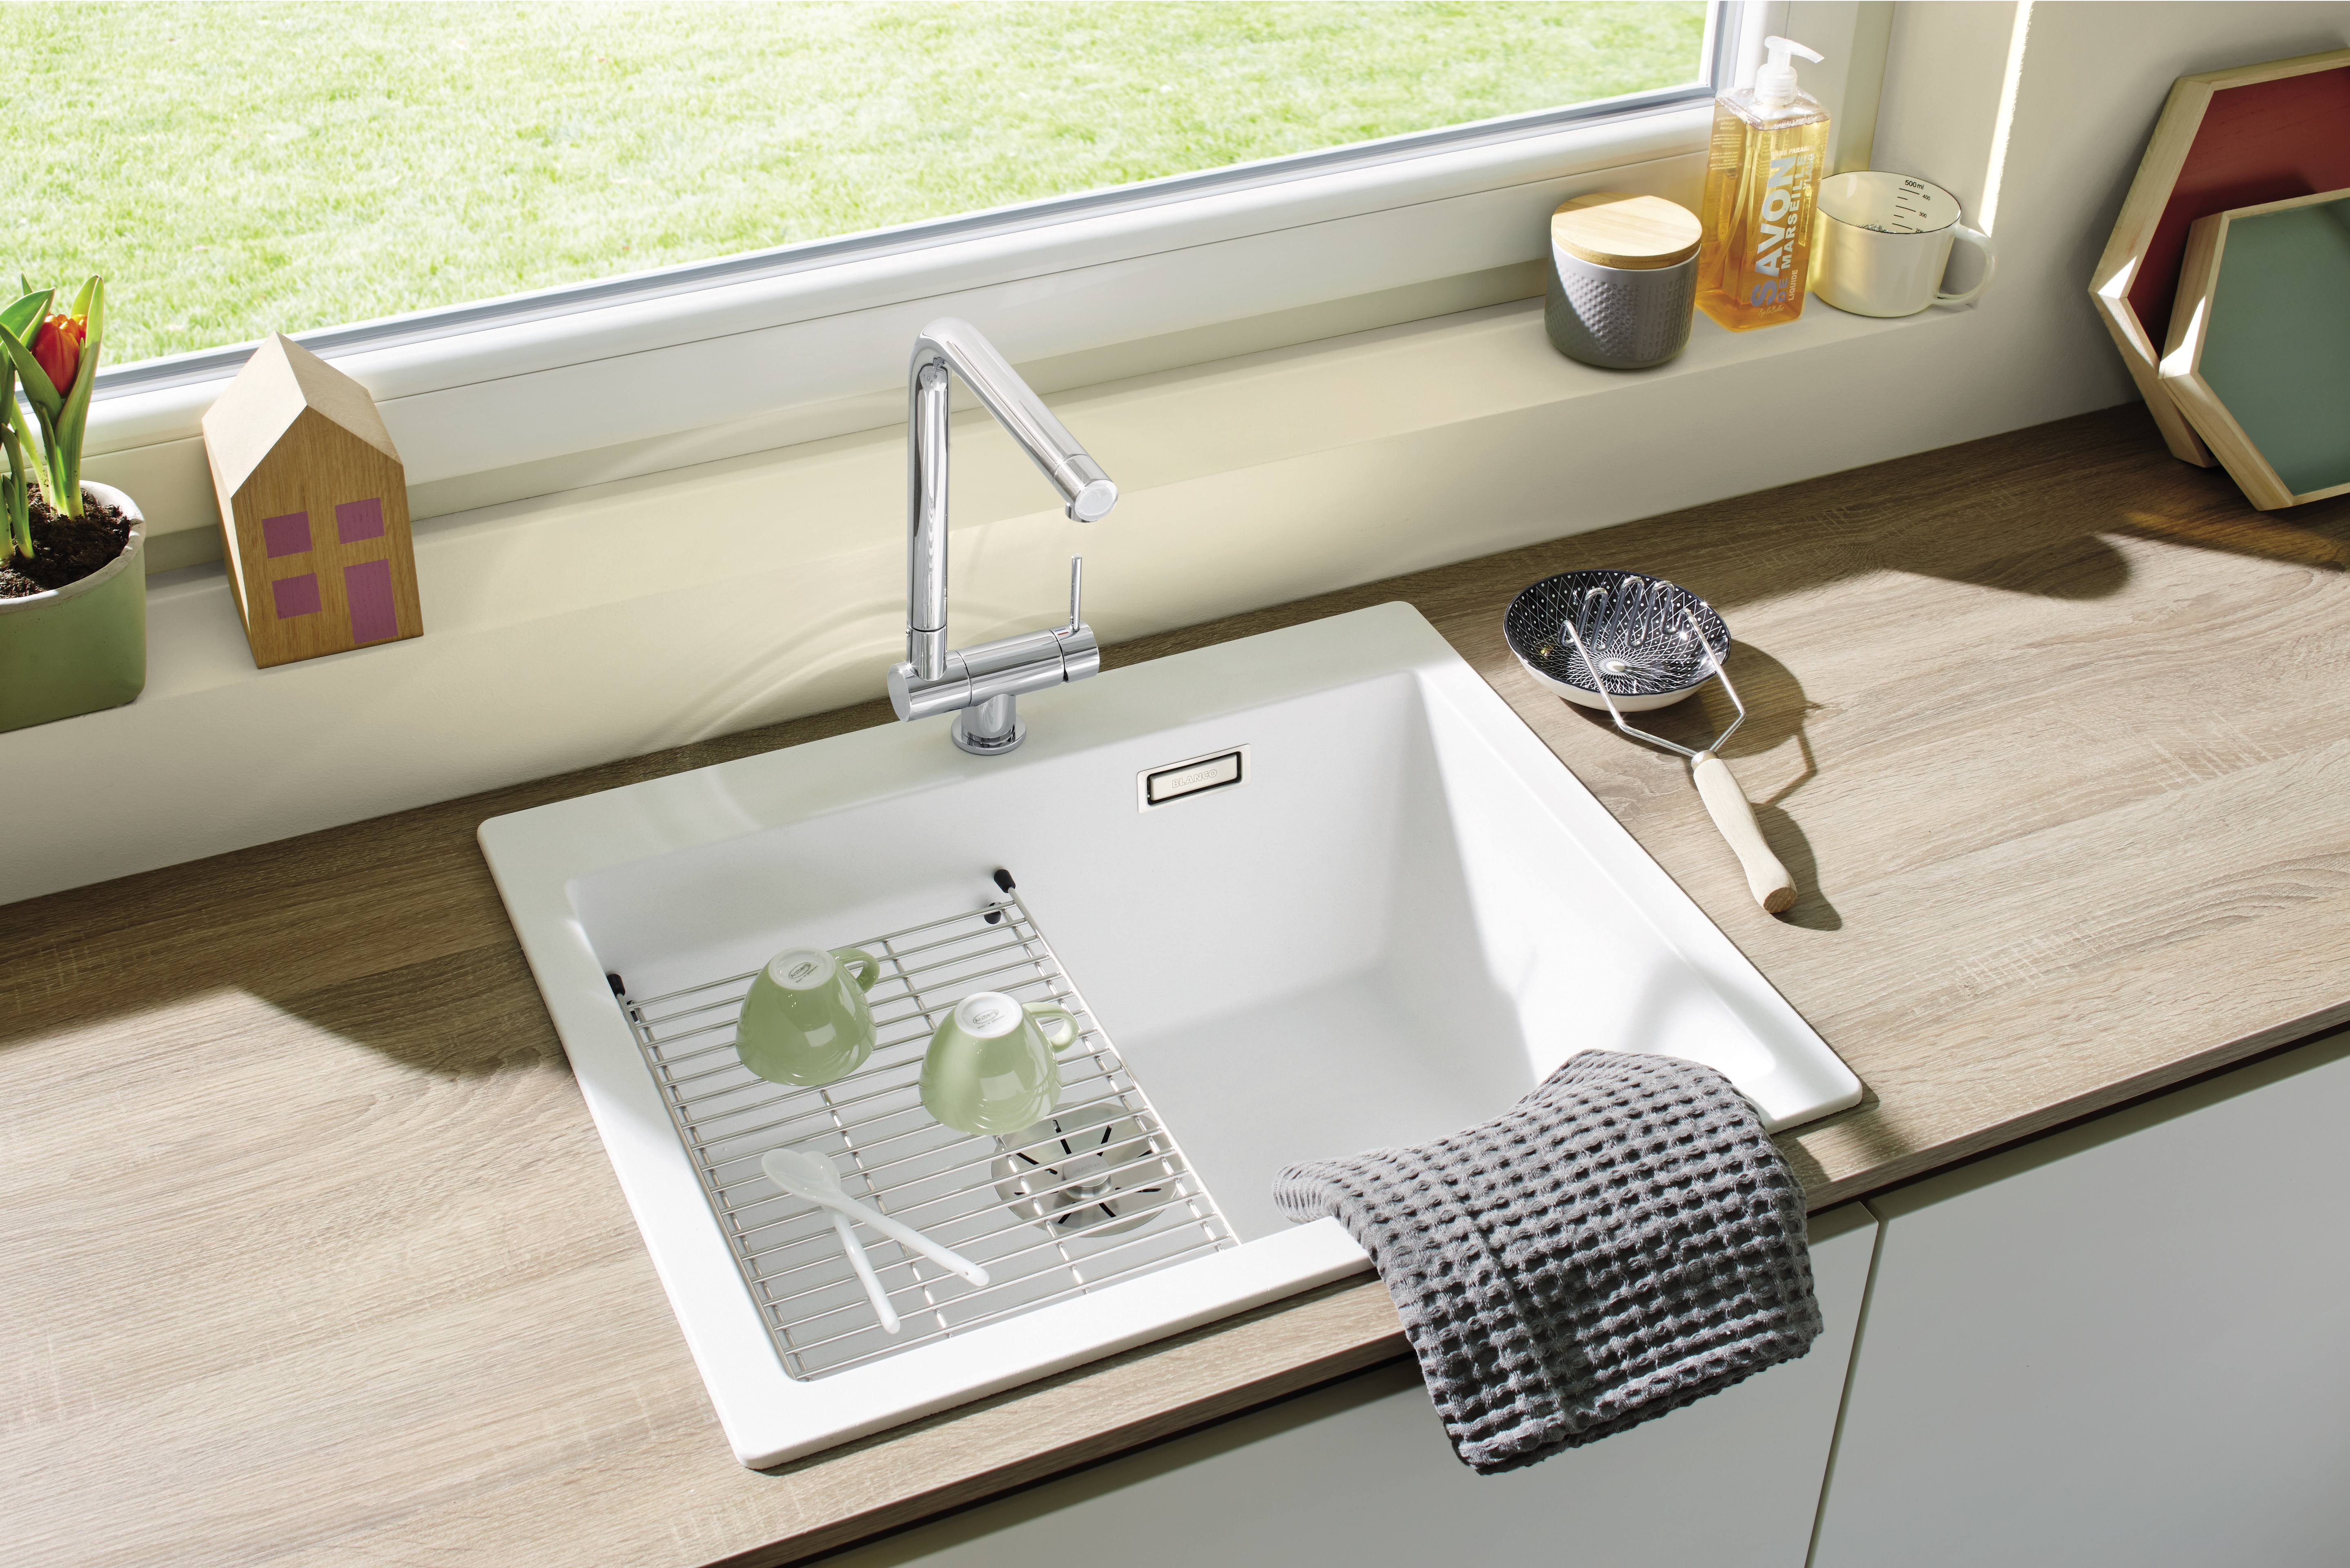 Mixer taps made of chrome or stainless steel make the best window-facing fittings.